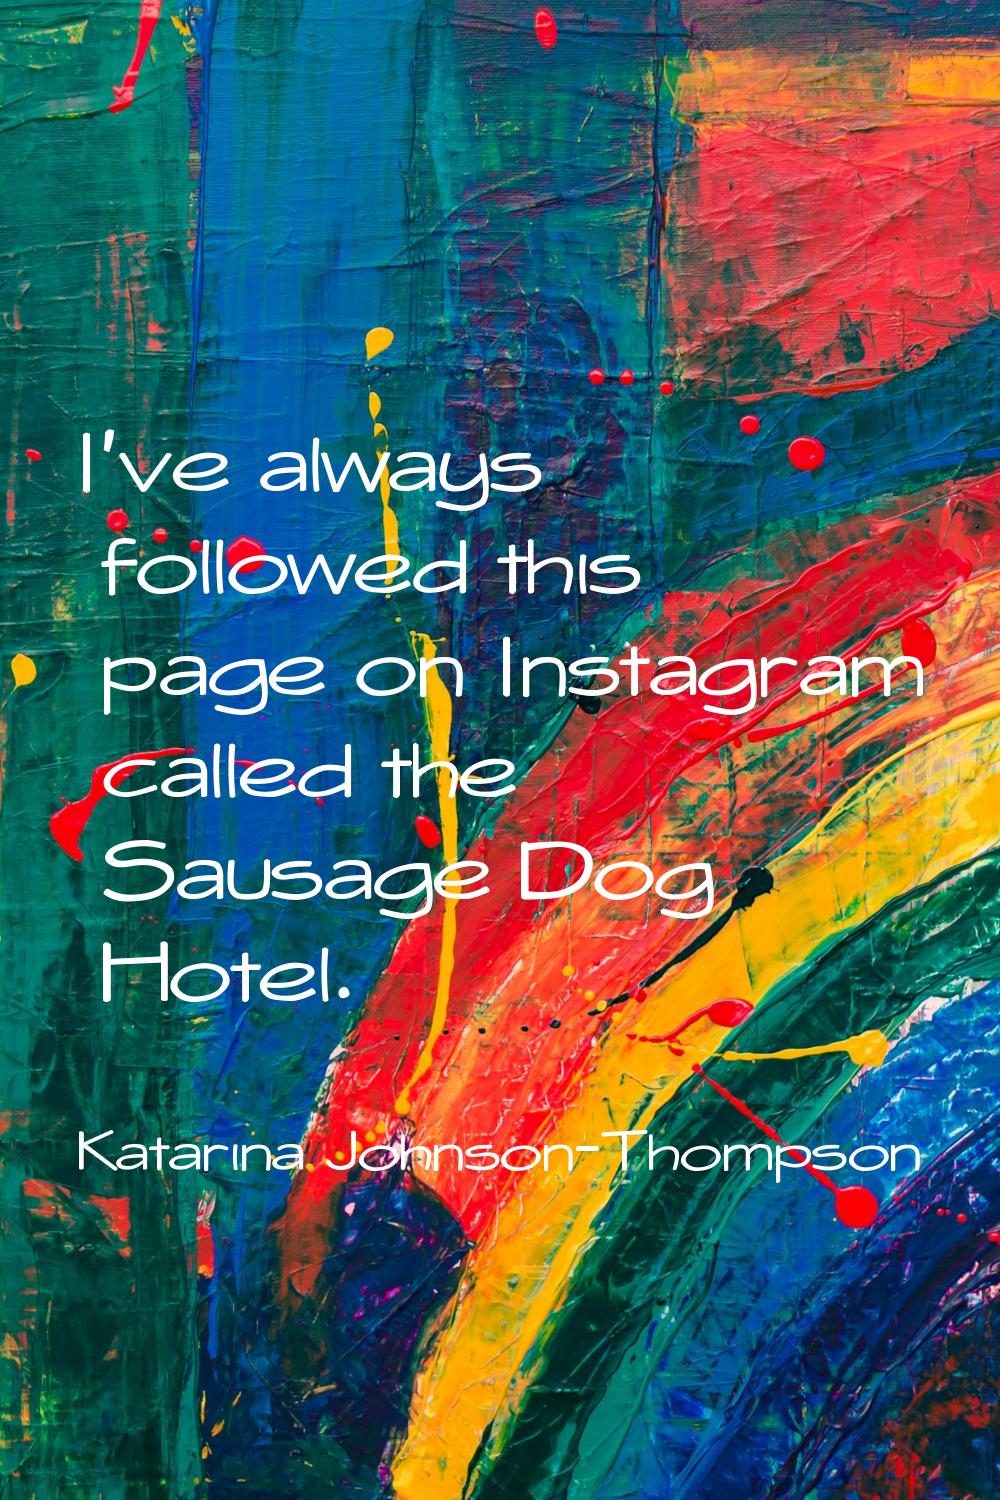 I've always followed this page on Instagram called the Sausage Dog Hotel.